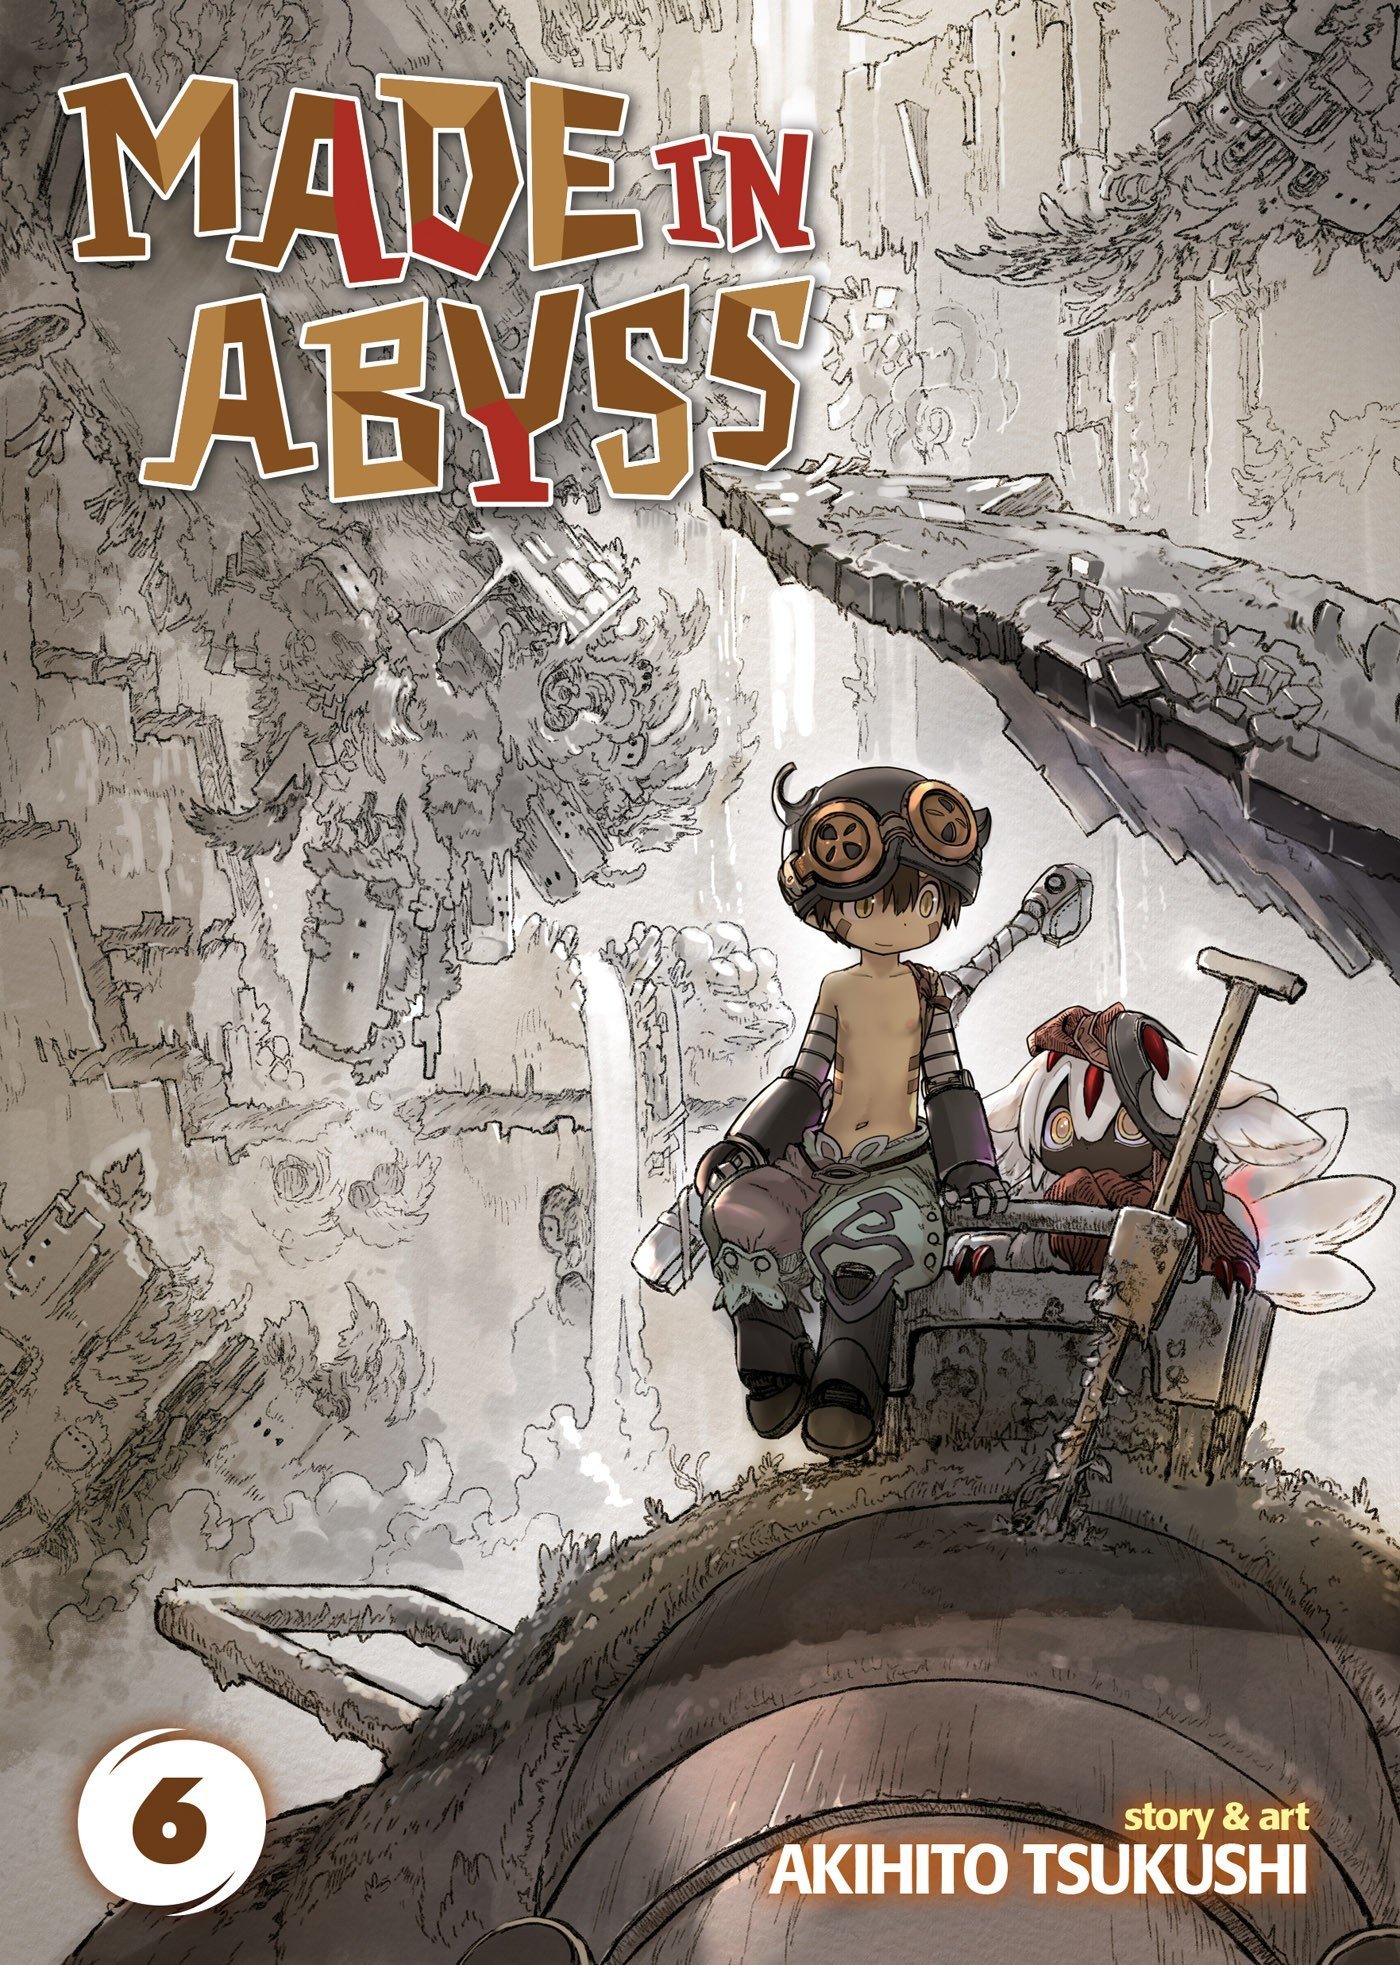 Made in Abyss cover 19